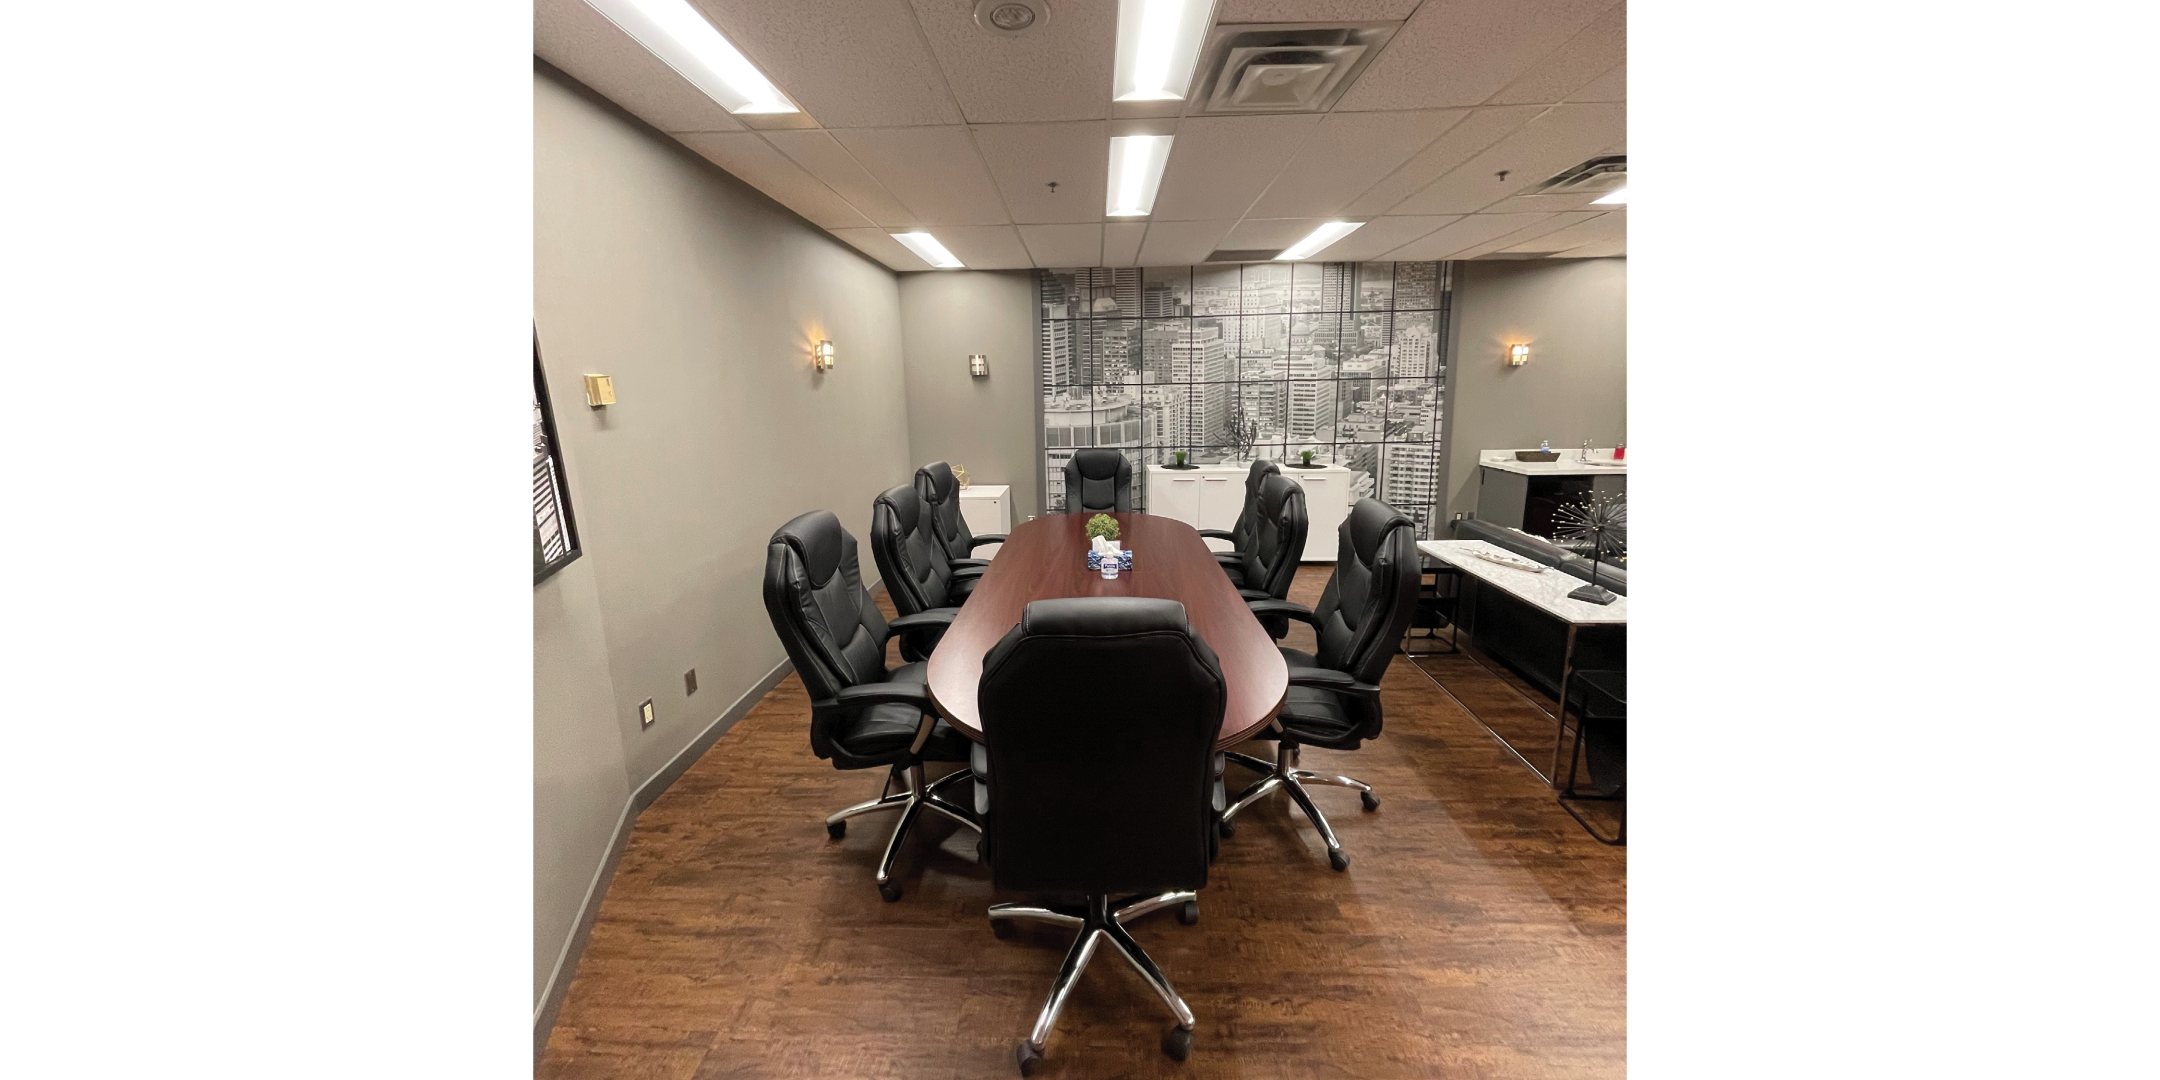 90 Matheson Boardroom with 8 chairs and a painting on the wall